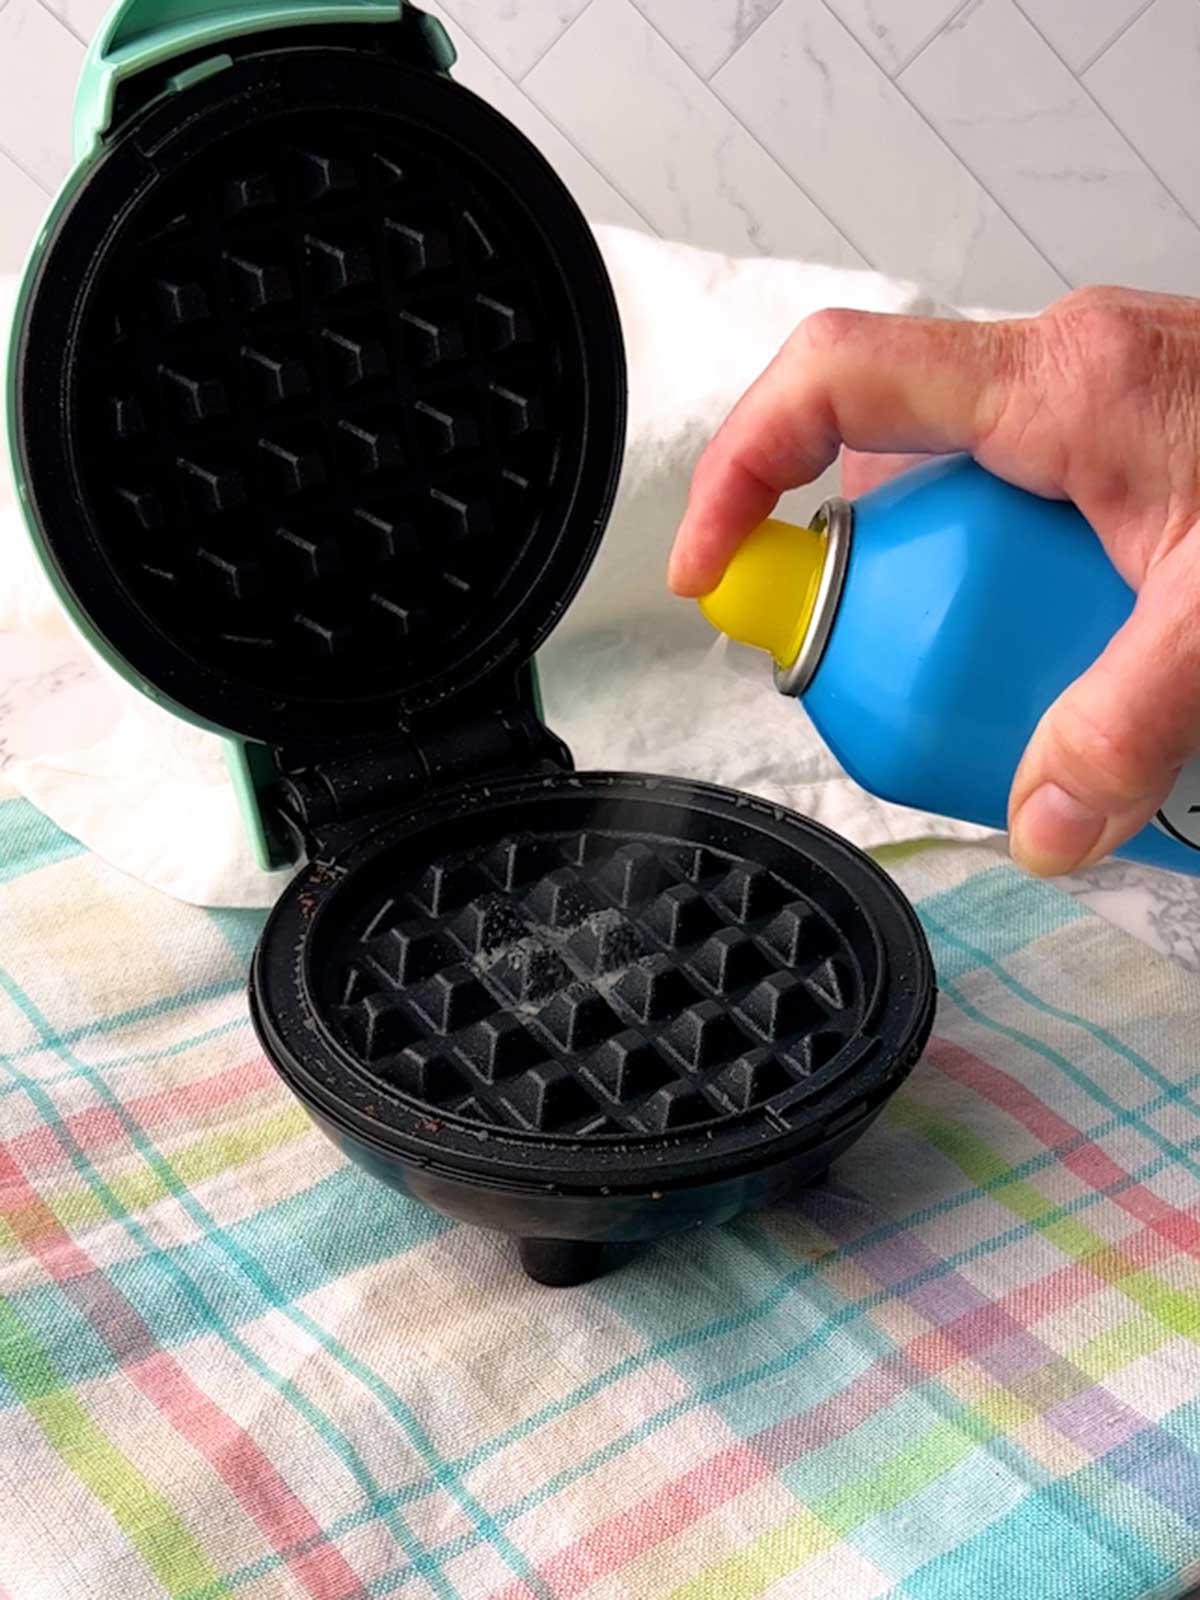 Spraying vegetable oil into mini waffle maker.